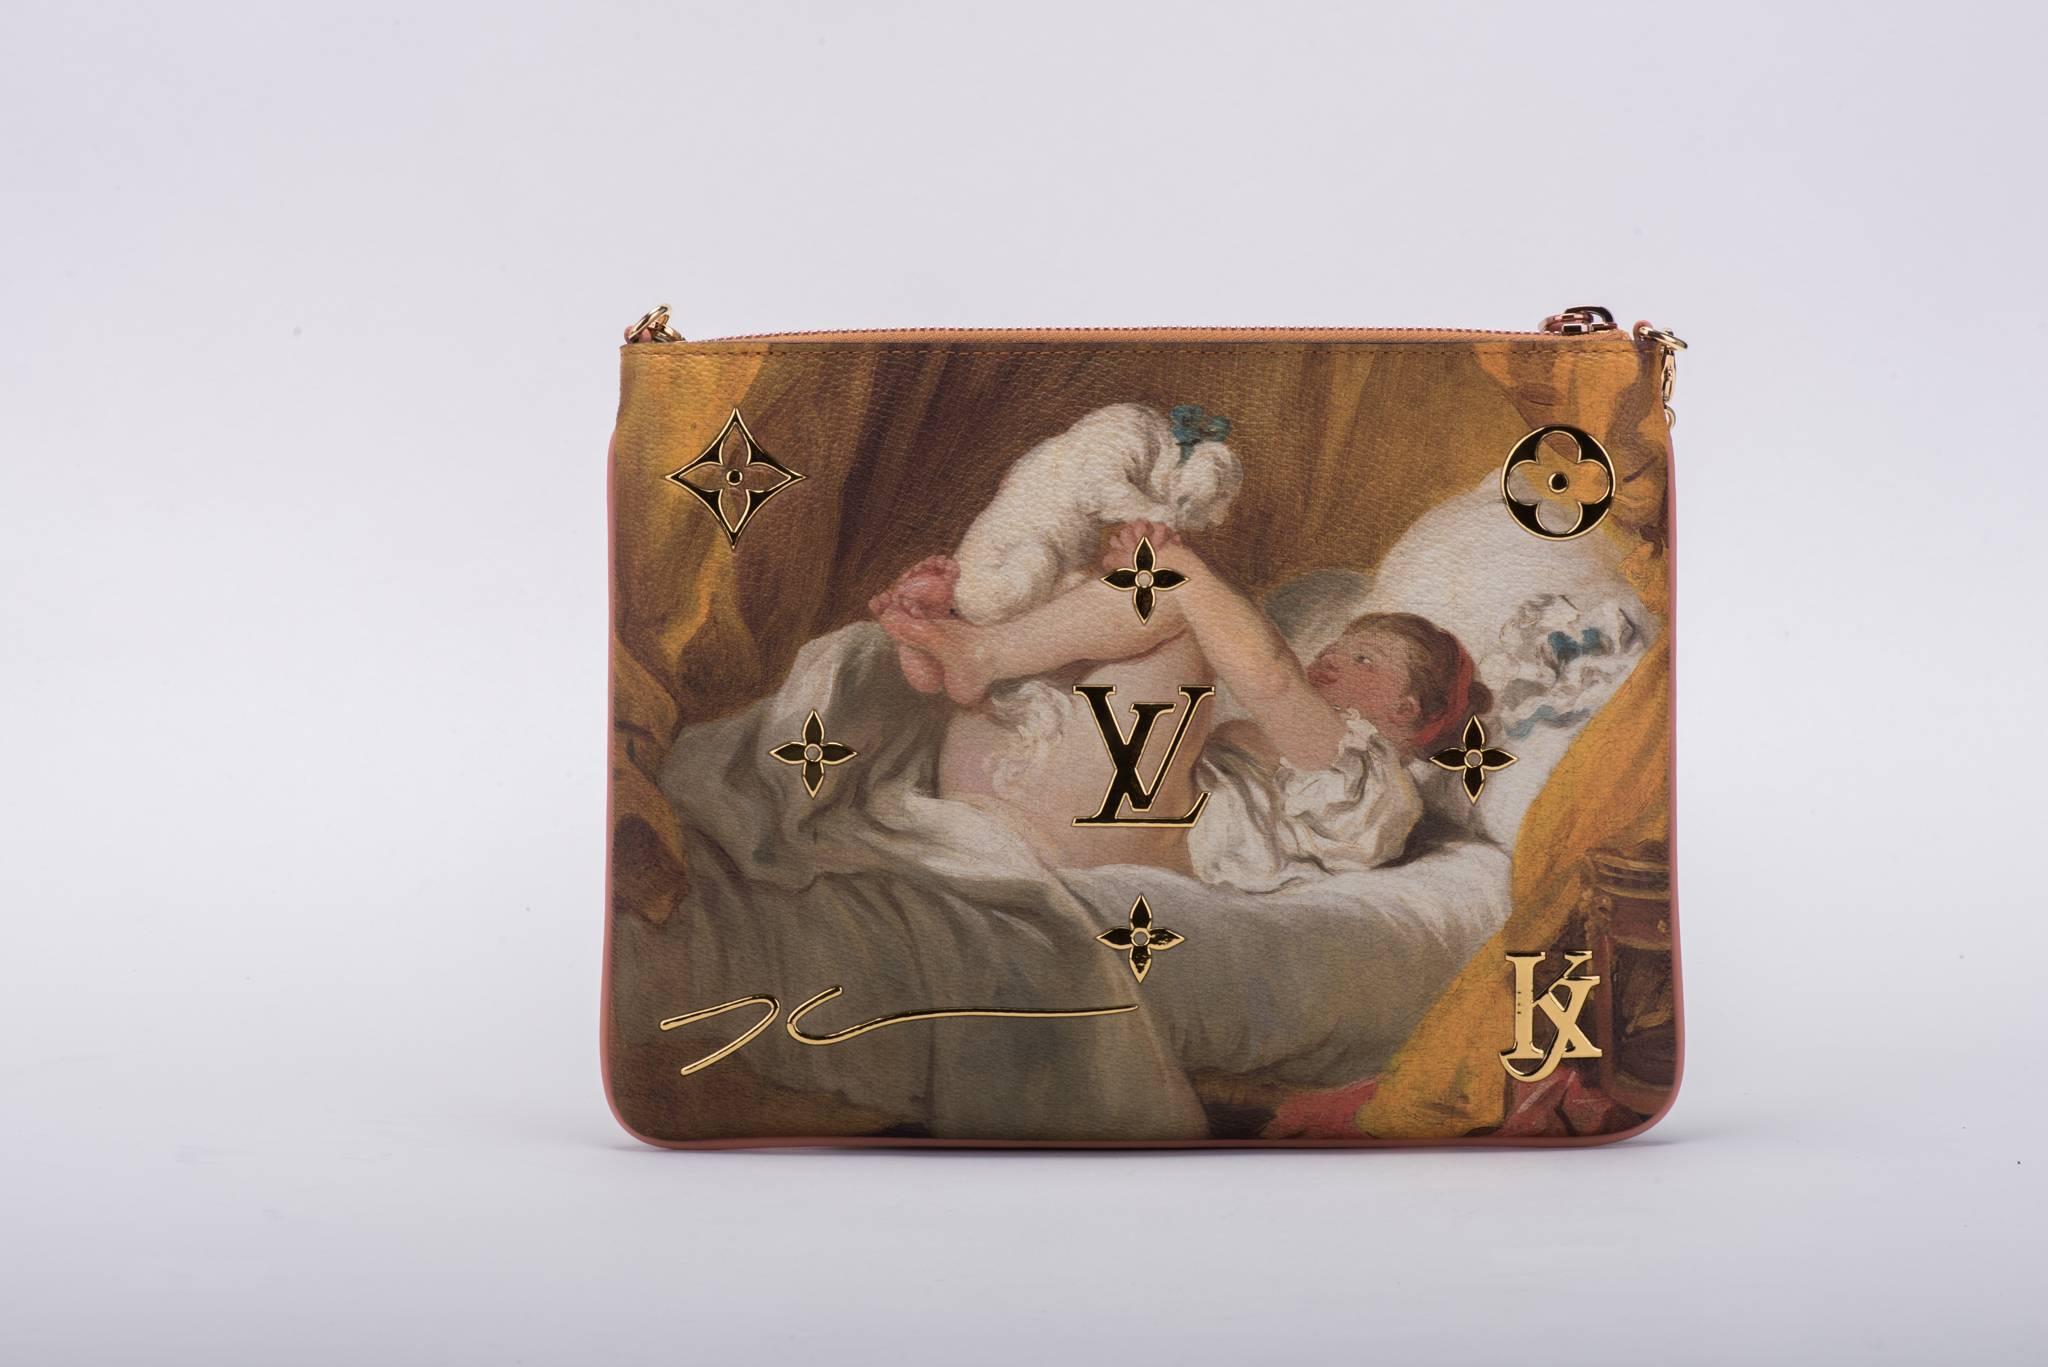 This bag is part of the much sought after Jeff Koons 